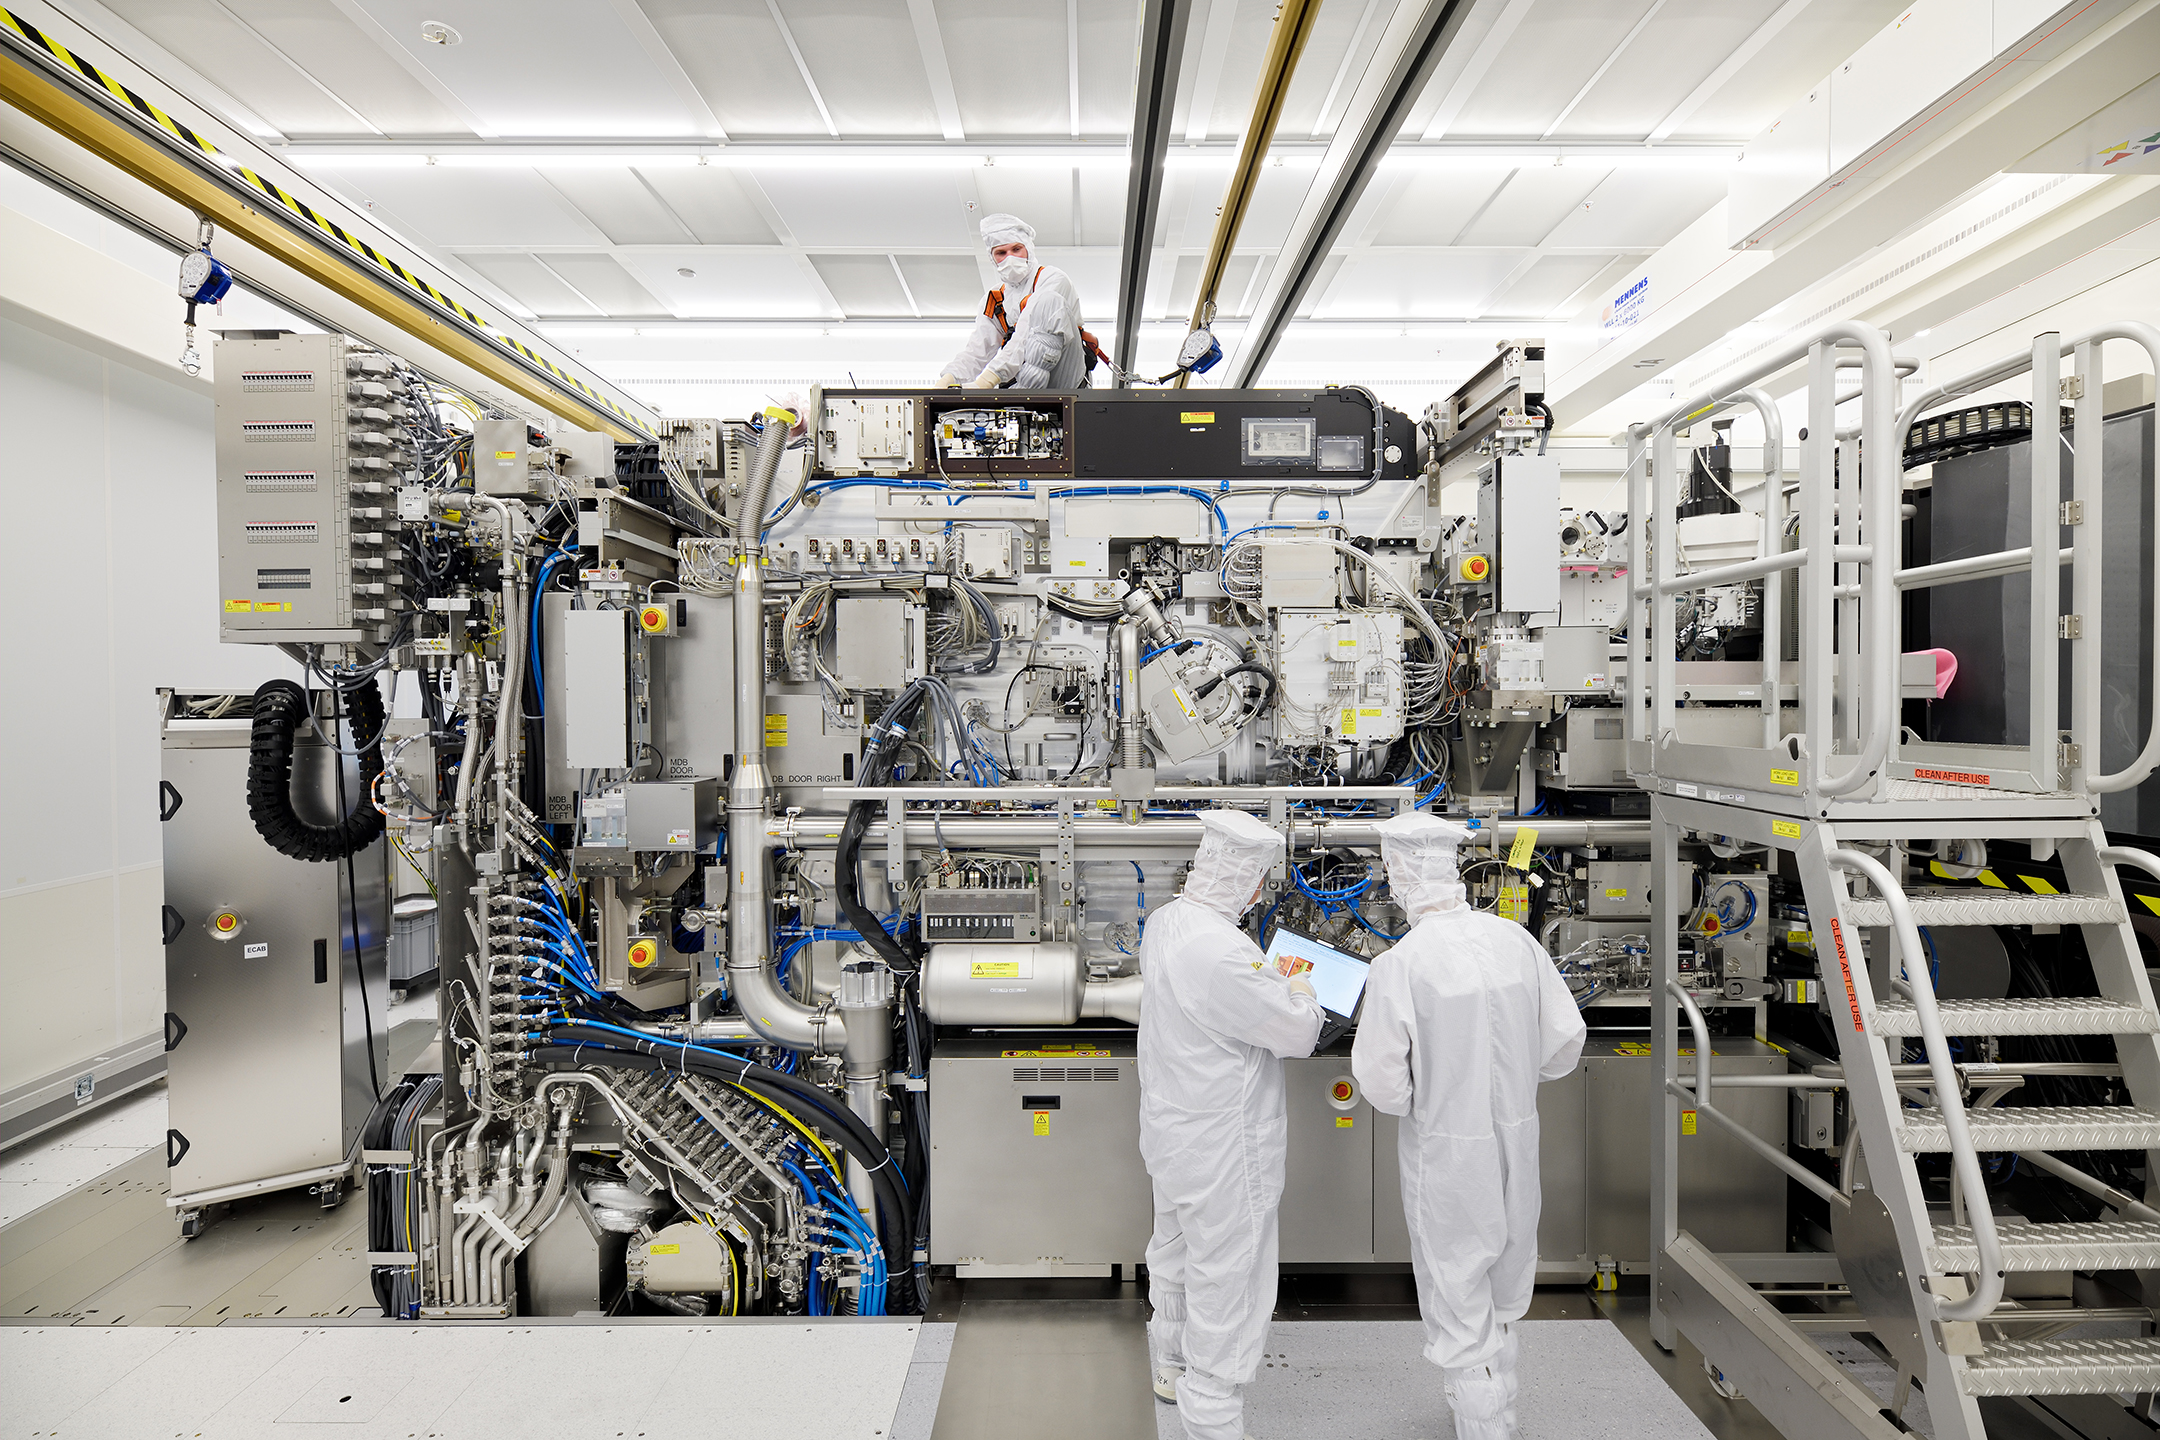 Three people in white clean-room body suits work on a machine in a white room